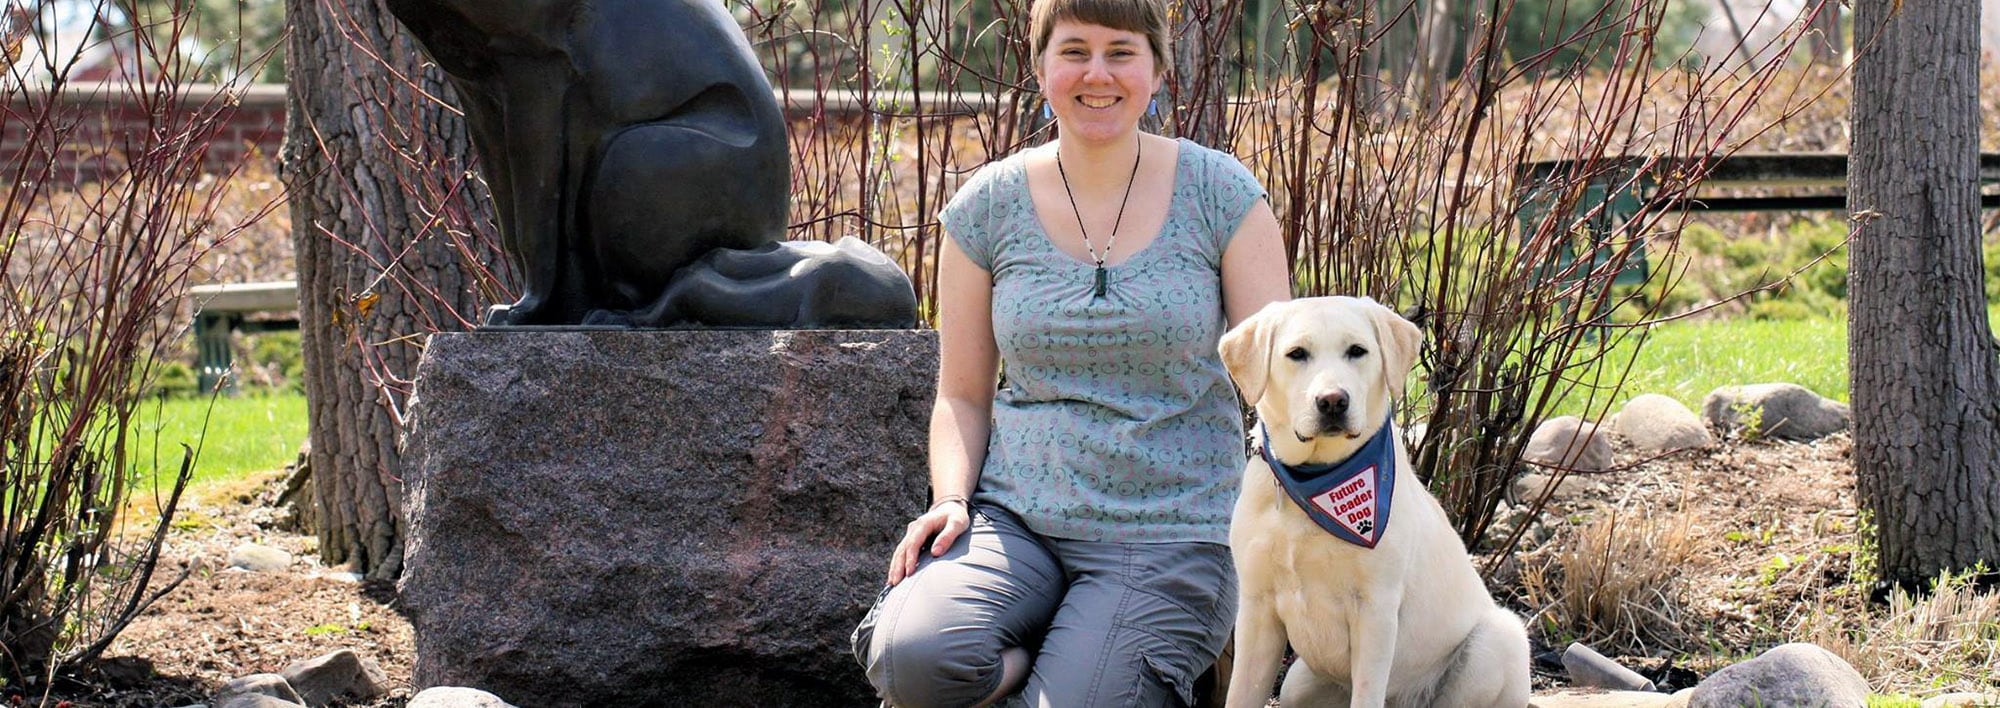 A young woman kneels on grass smiling at the camera with one hand on a seated yellow Labrador in blue Future Leader Dog bandanna next to her